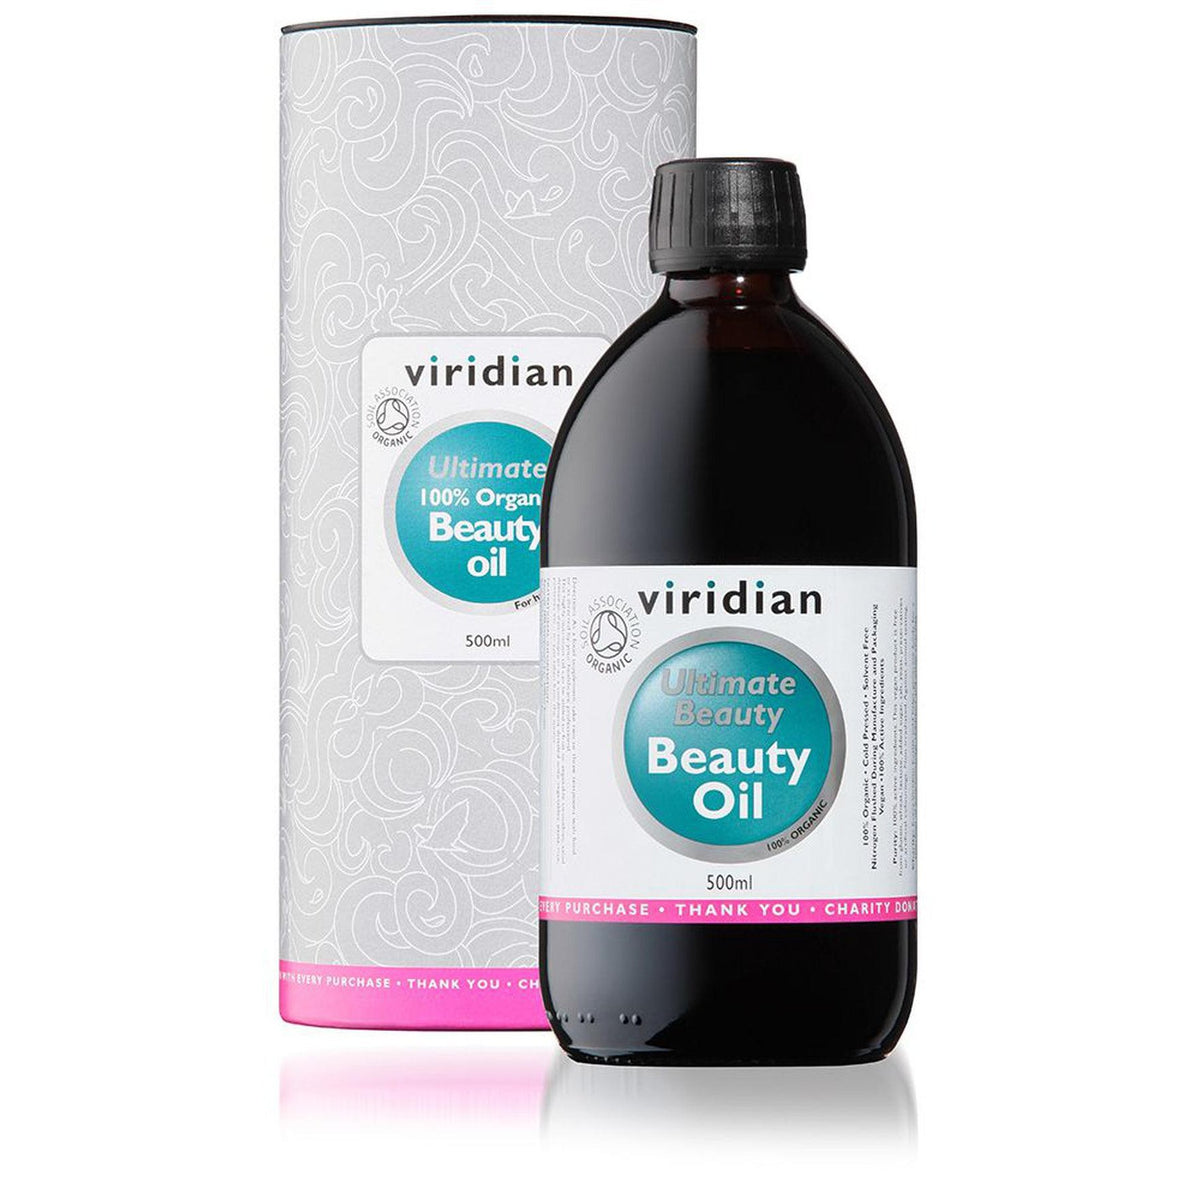 Viridian Organic Ultimate Beauty Oil 500ml- Lillys Pharmacy and Health Store